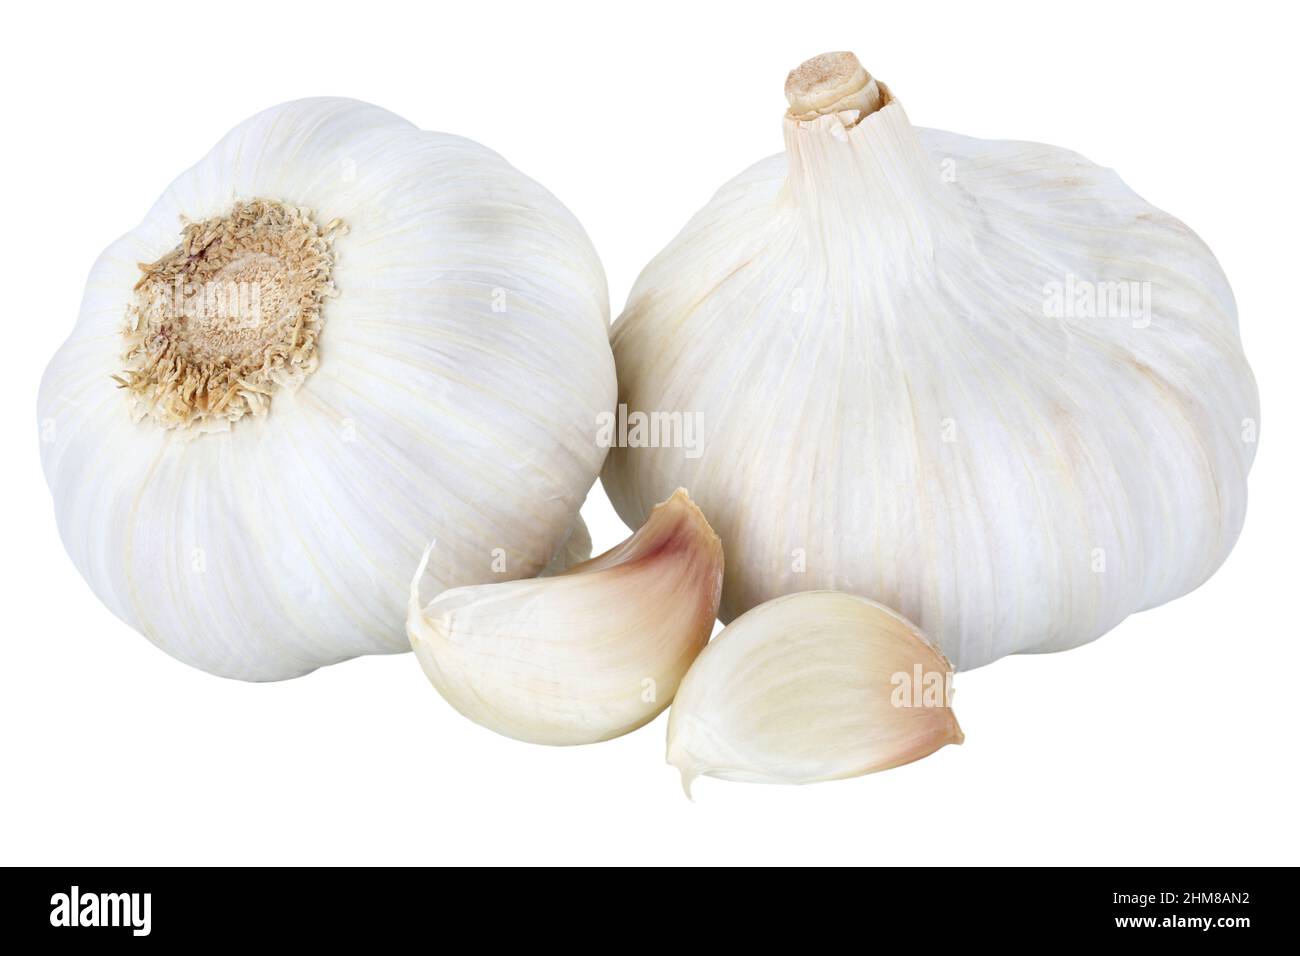 Garlic healthy spice vegan vegetable isolated on a white background Stock Photo